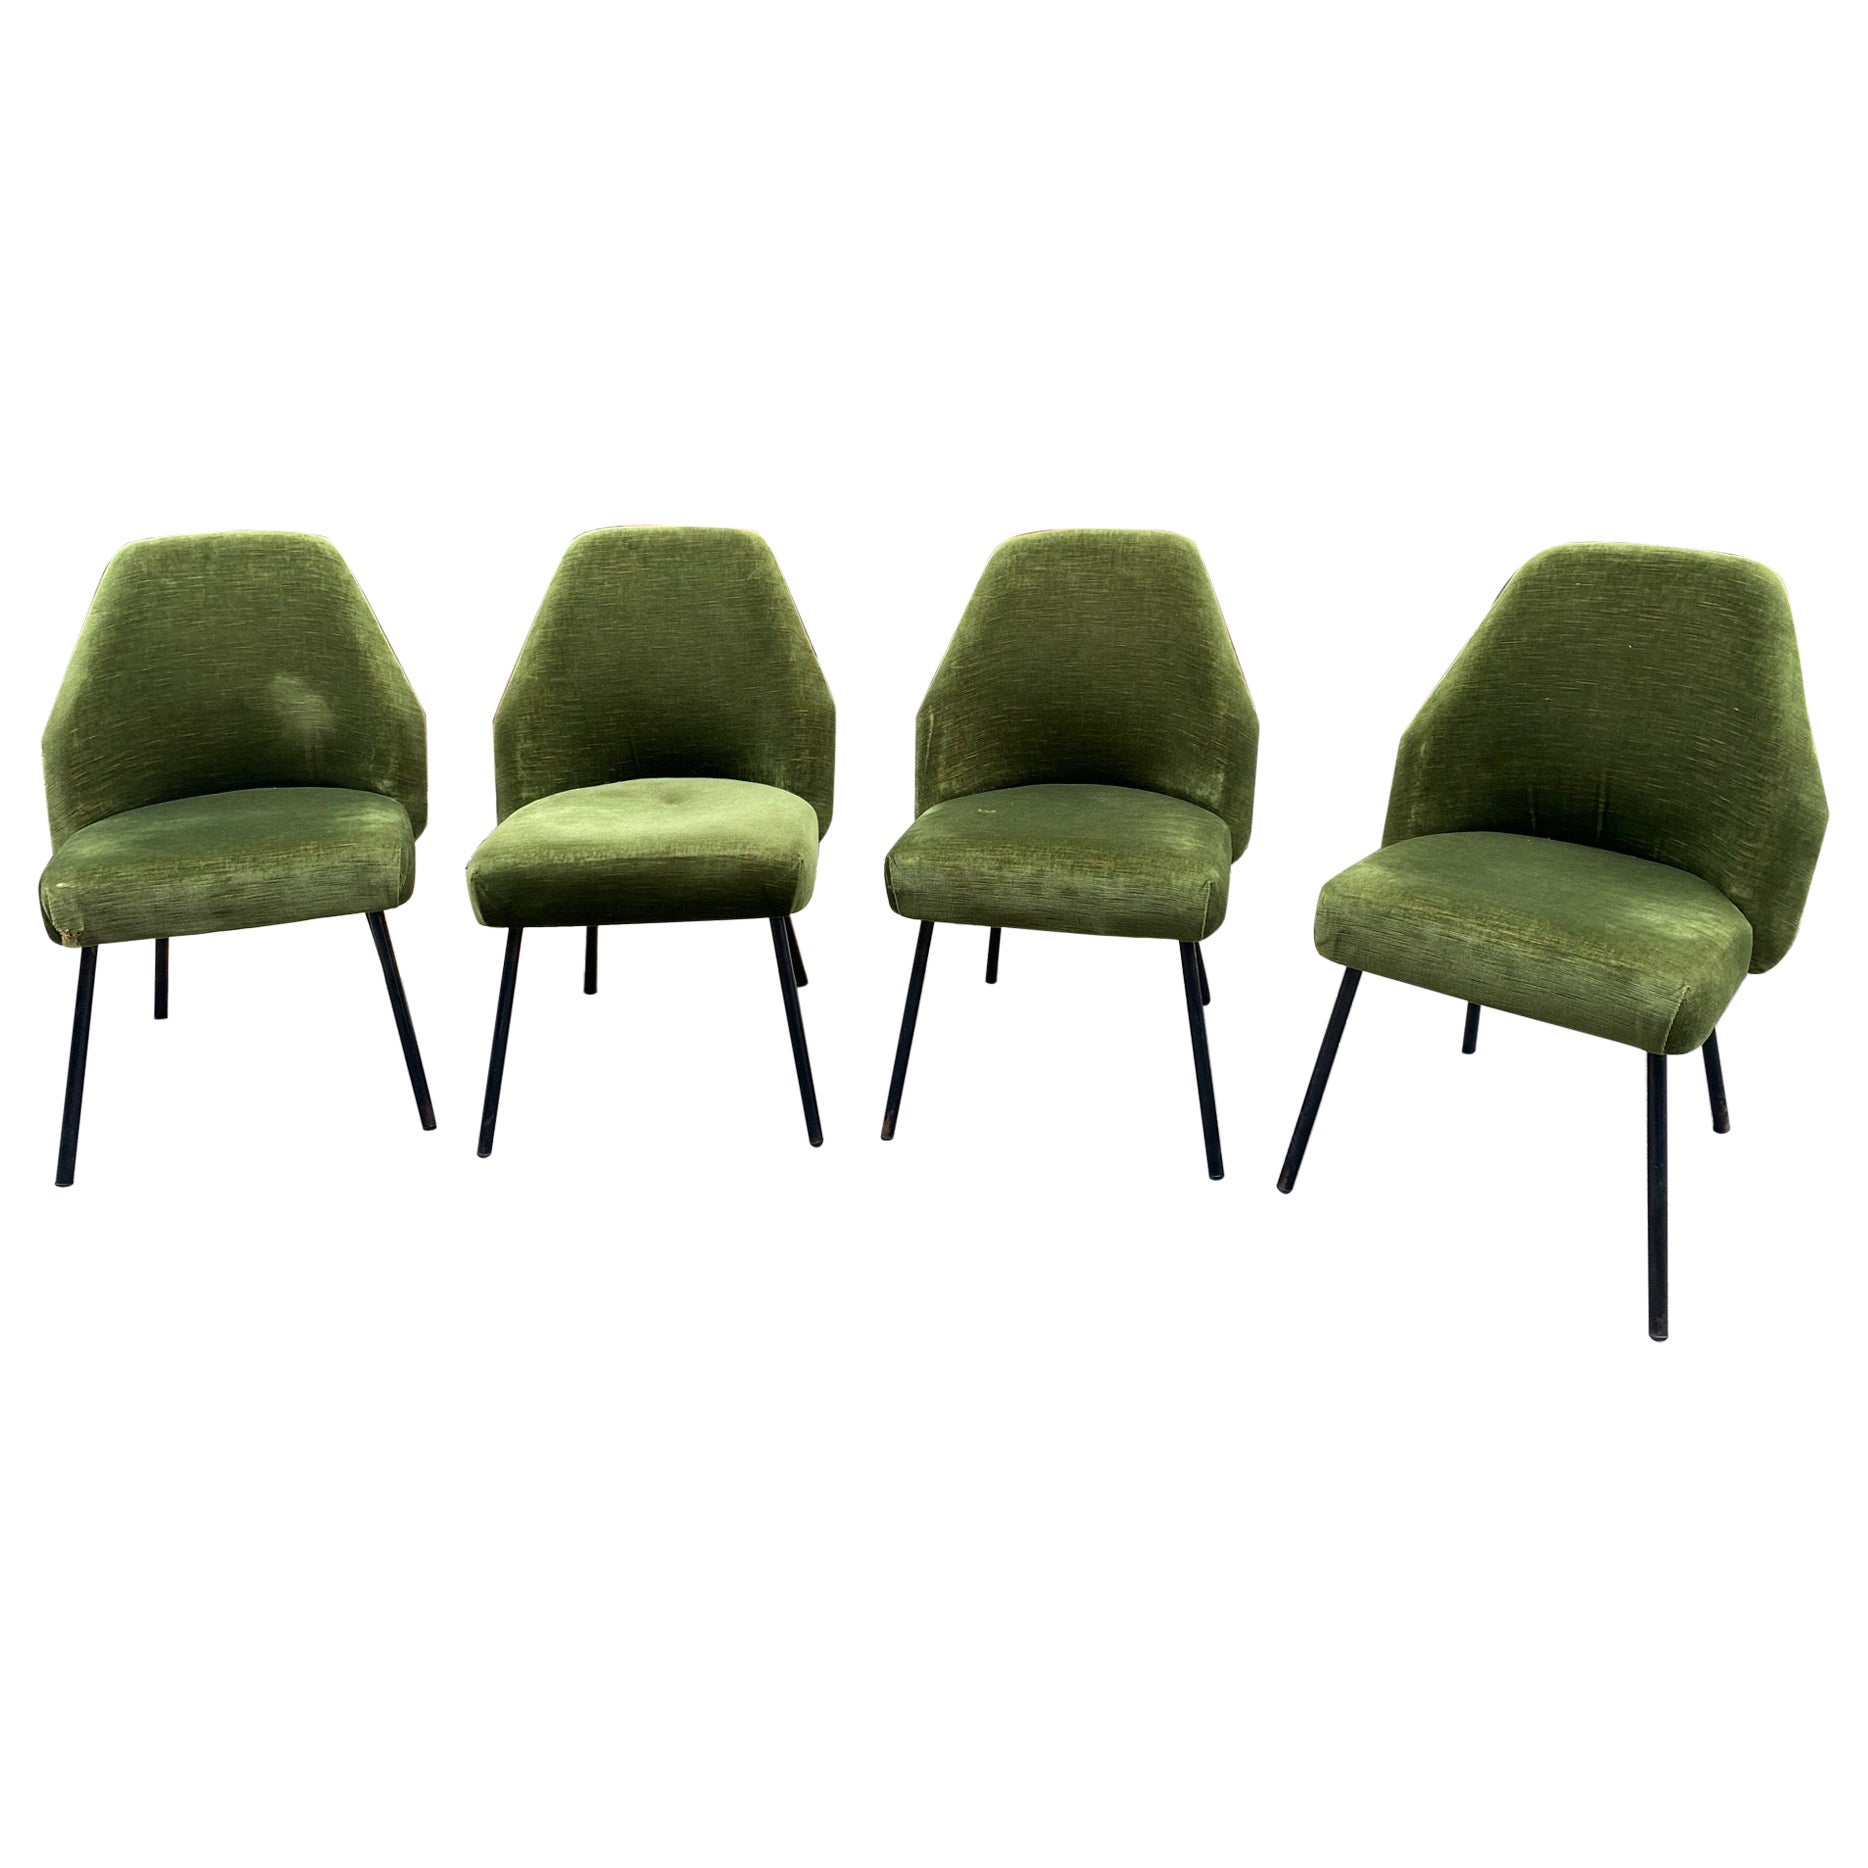 Set of four Campanula Chairs by Carlo Pagani for Arflex, Italy, 1950s For Sale